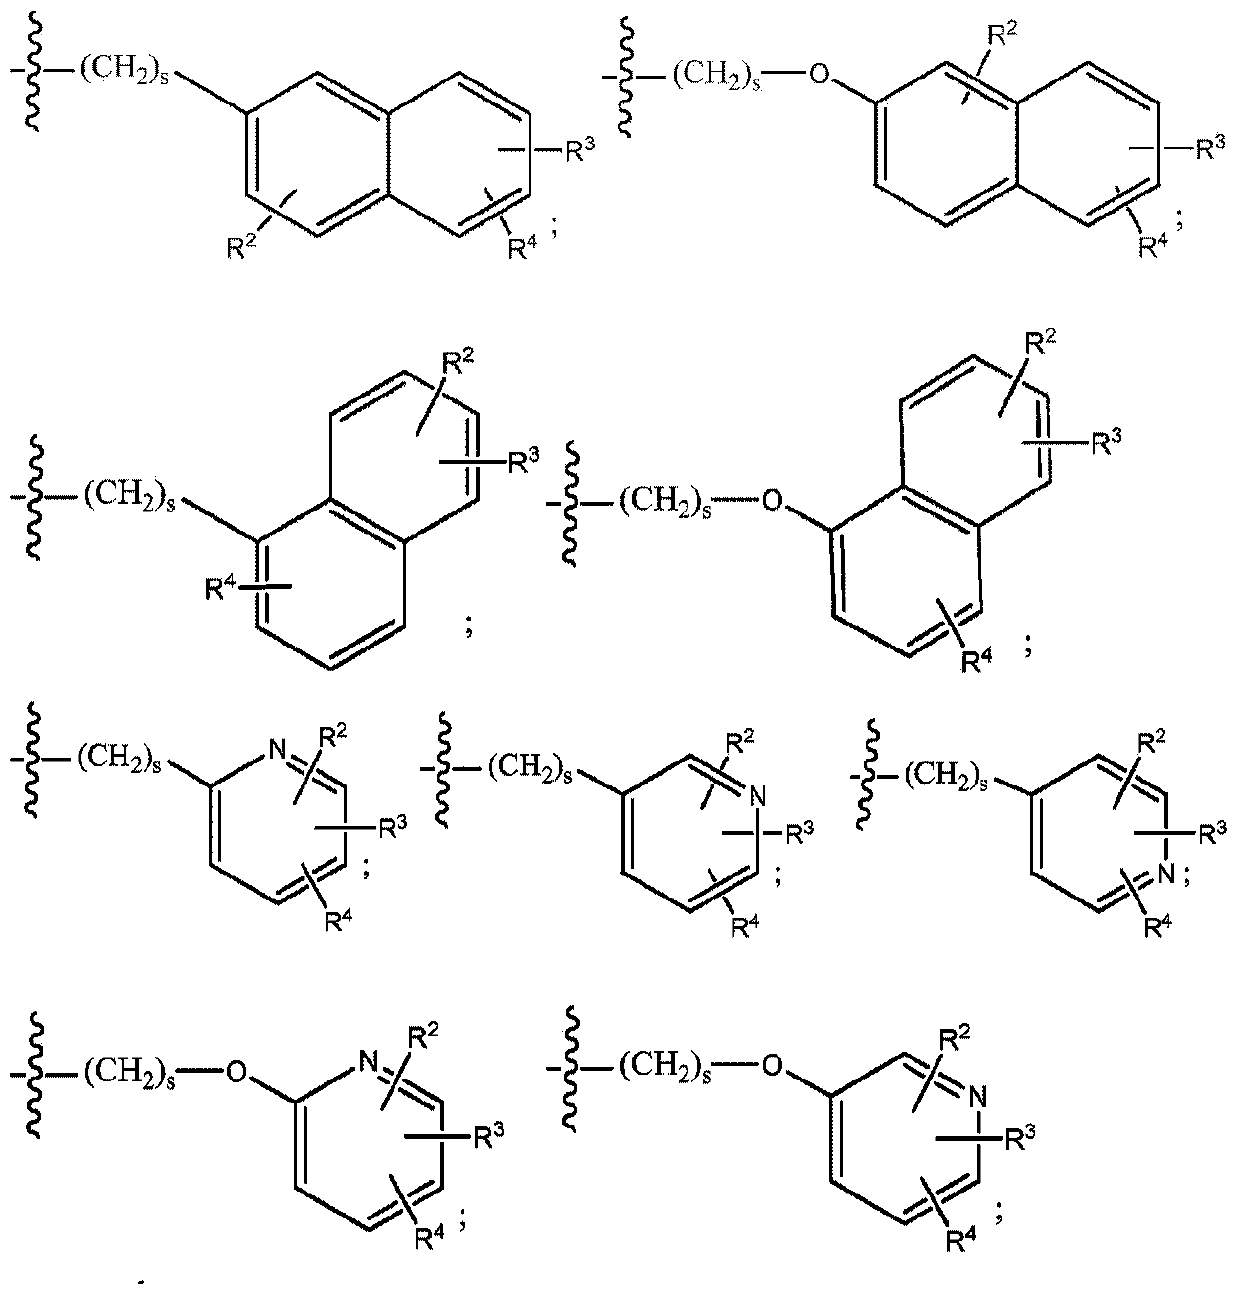 Arylalkyl-and aryloxyalkyl-substituted epithelial sodium channel blocking compounds